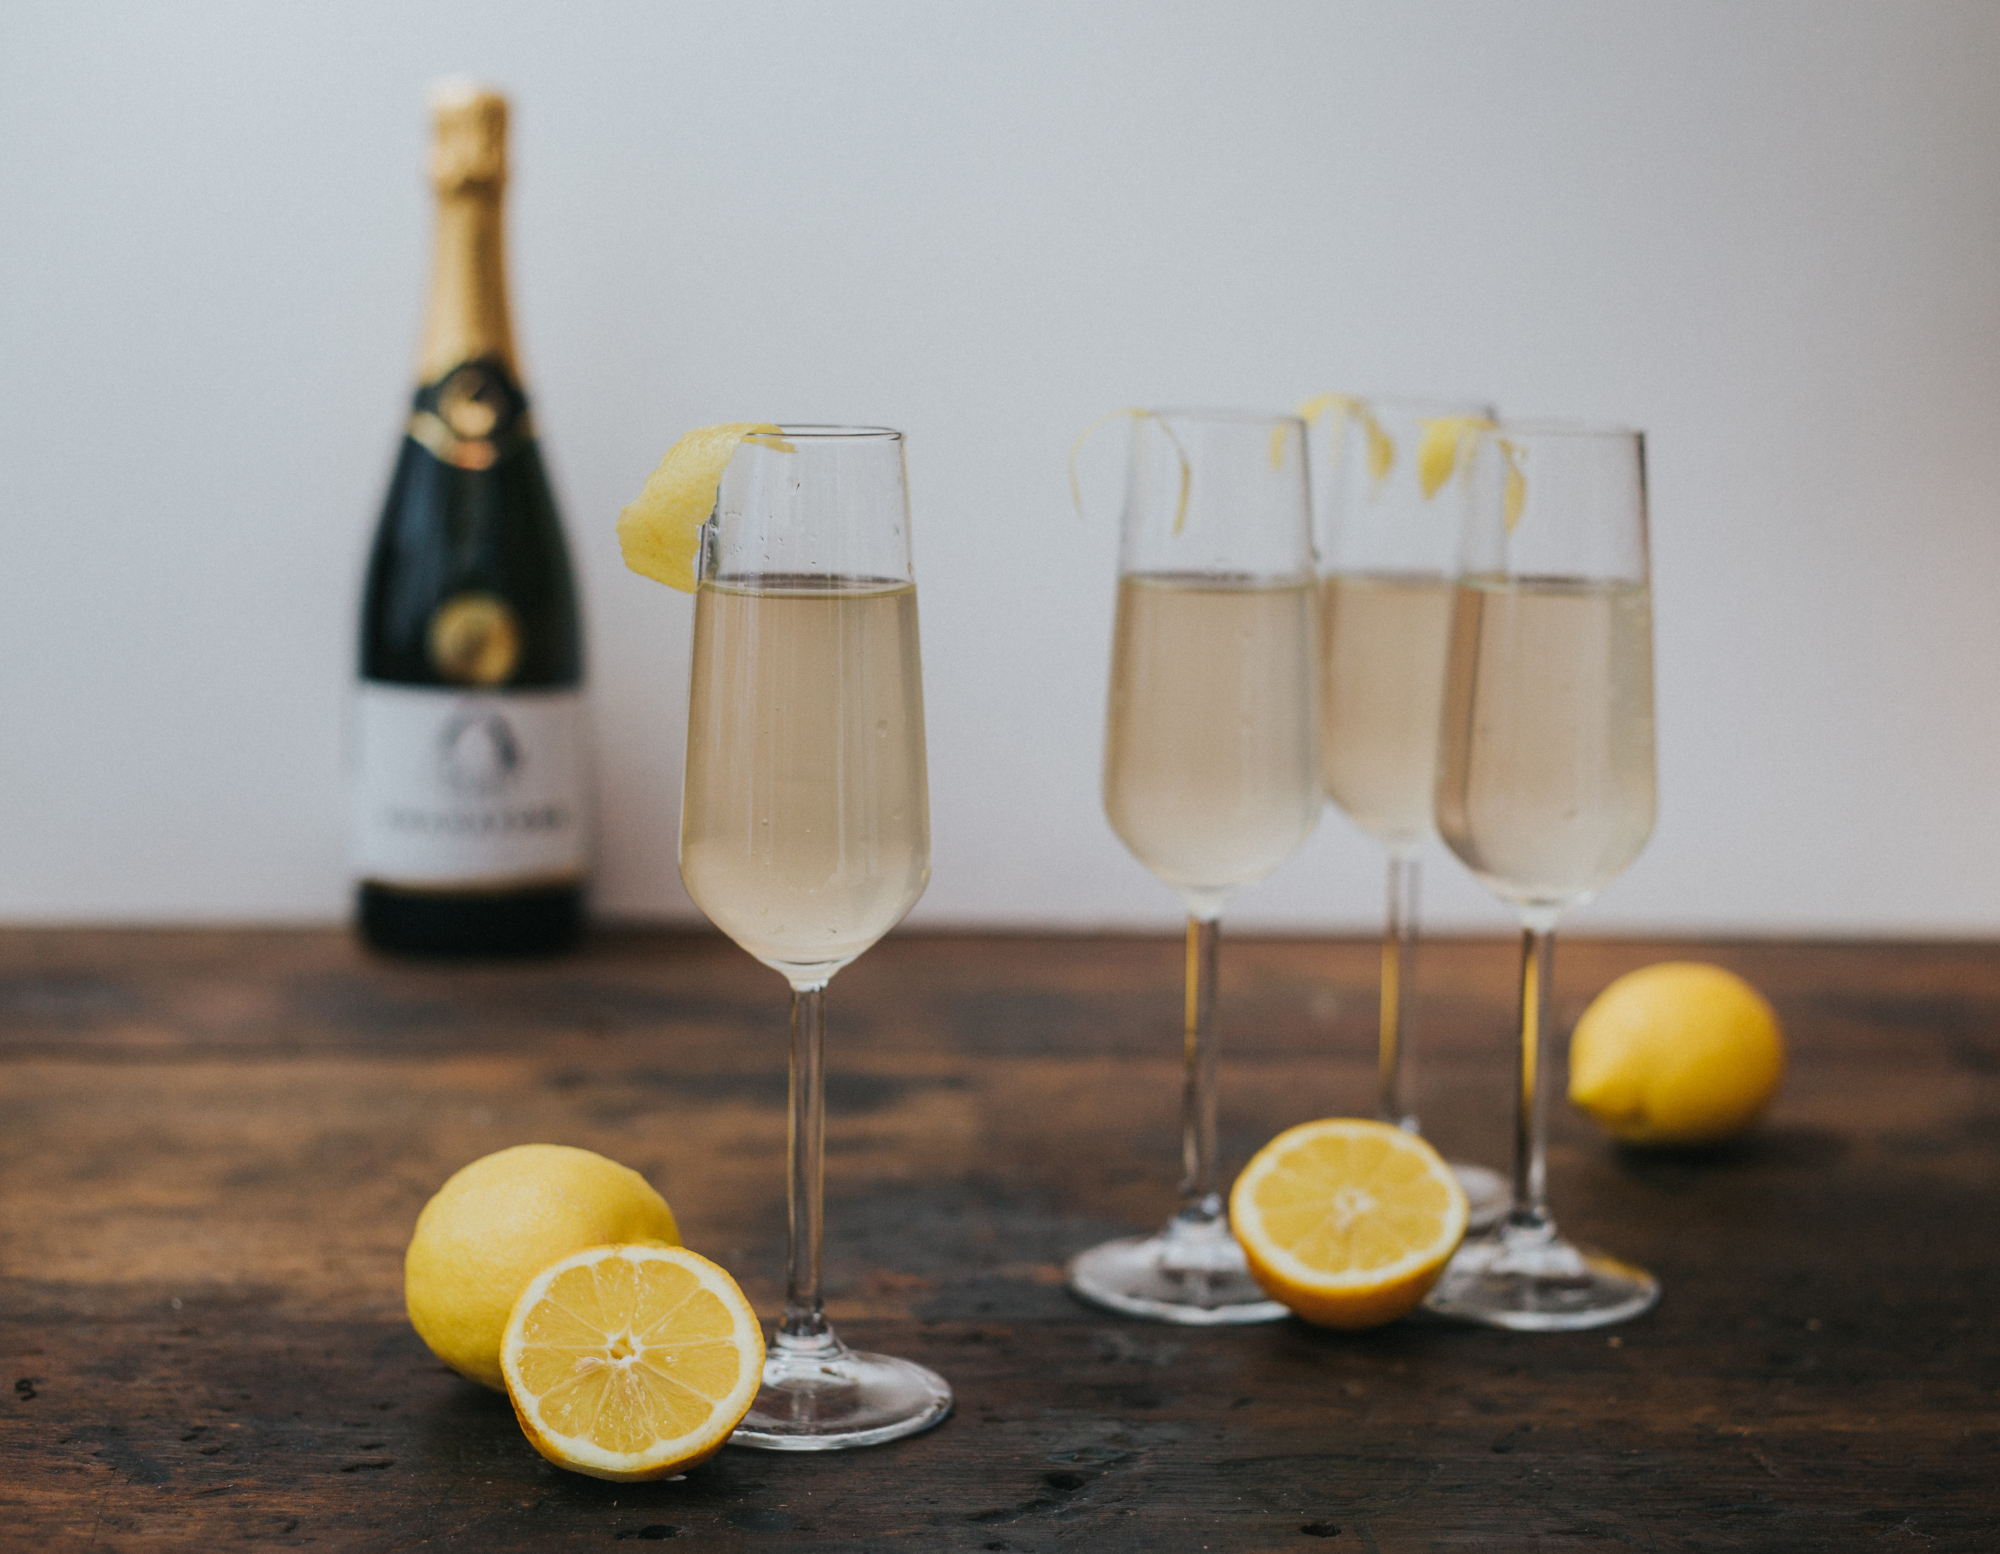 French 75 Gin Cocktail Recipe